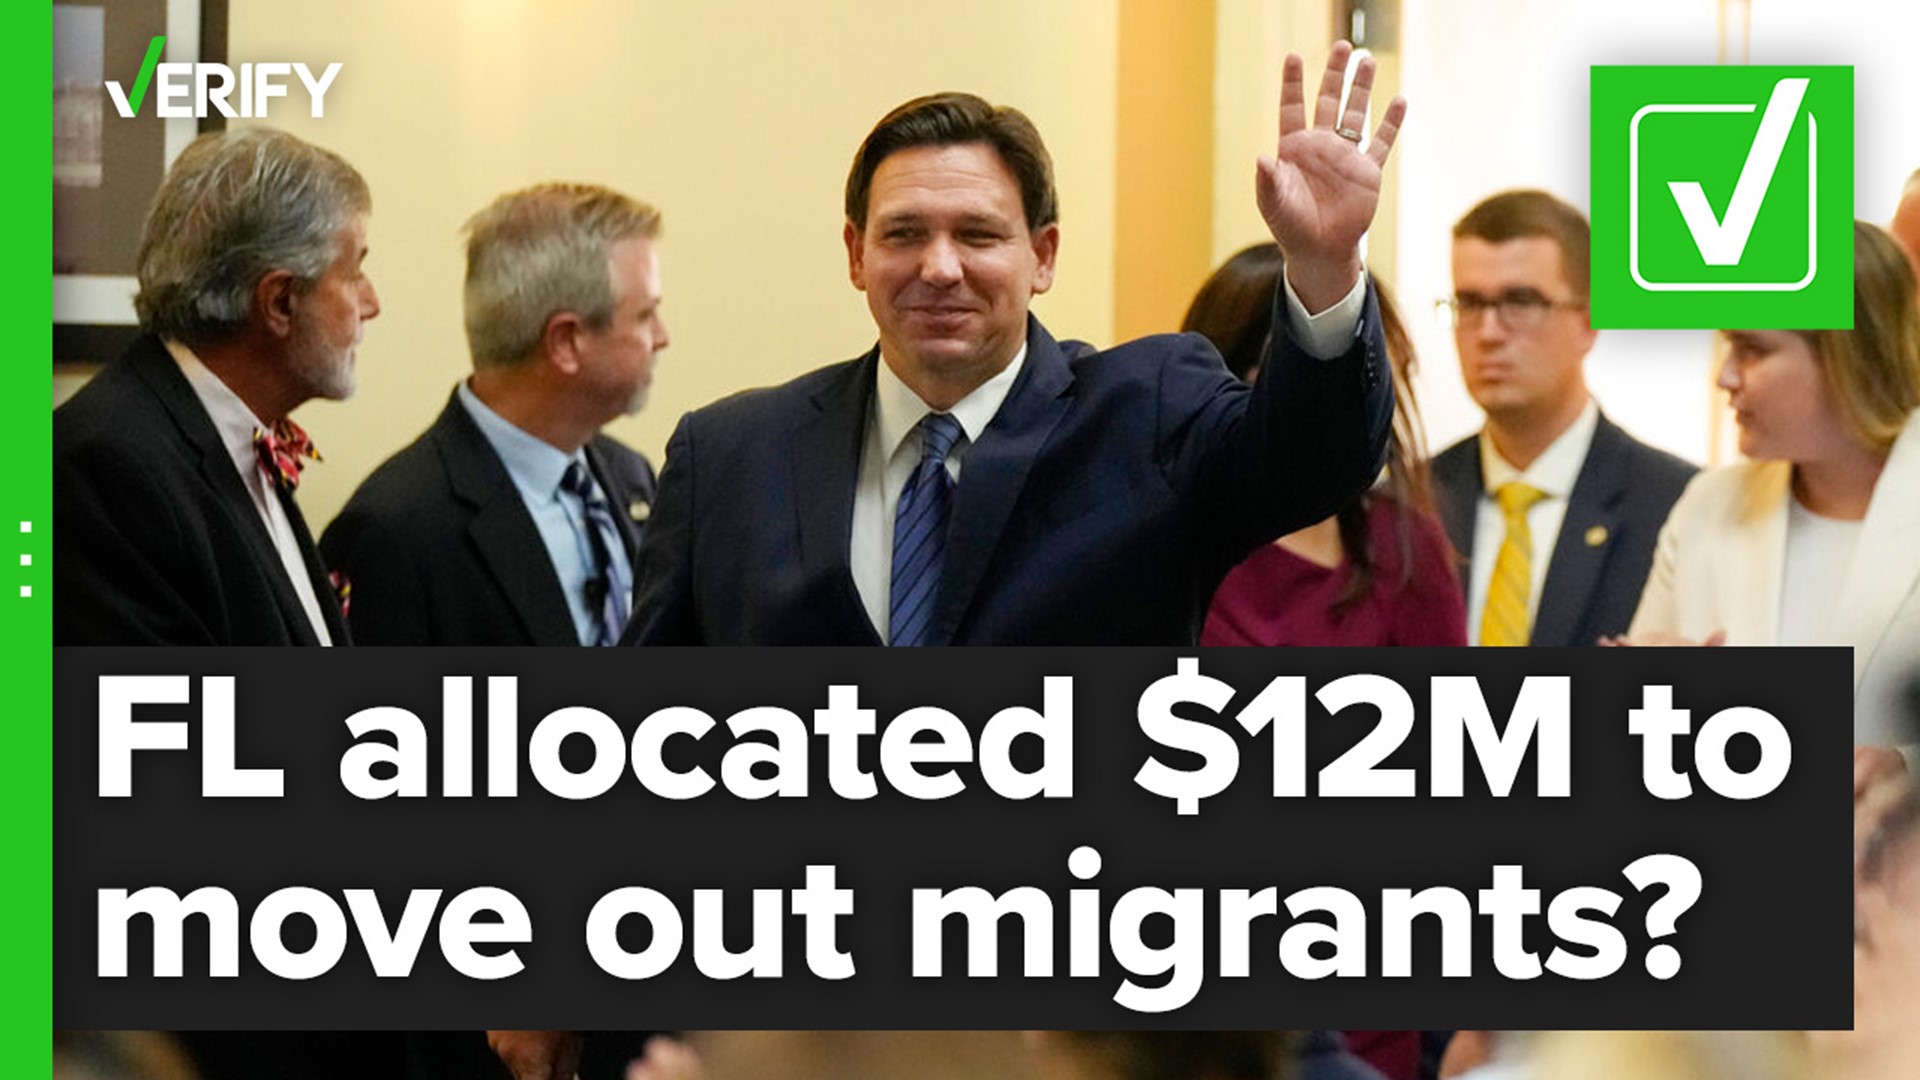 Florida’s Freedom First Budget included $12 million for a program to “transport unauthorized aliens” out of the state, including locations such as Martha’s Vineyard.